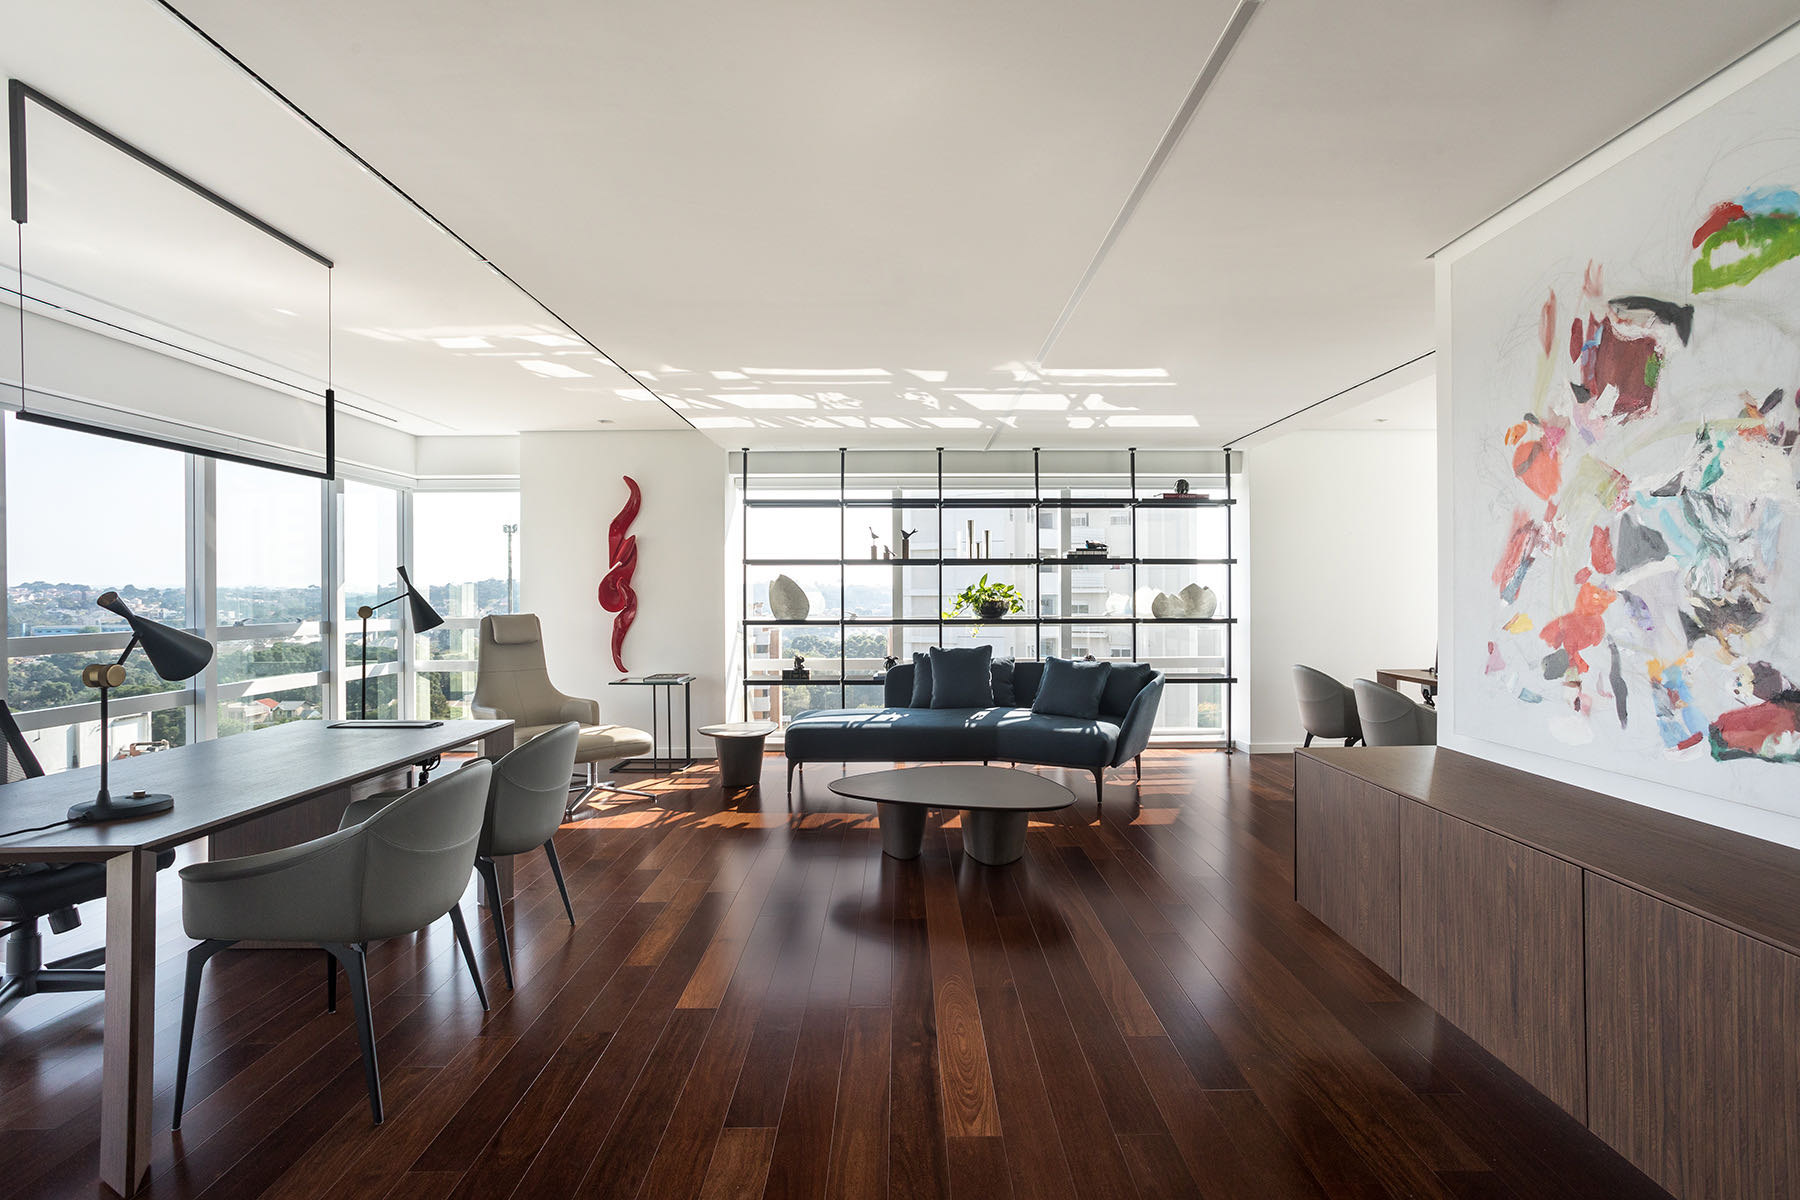 A Look Inside Private Company Offices in Curitiba